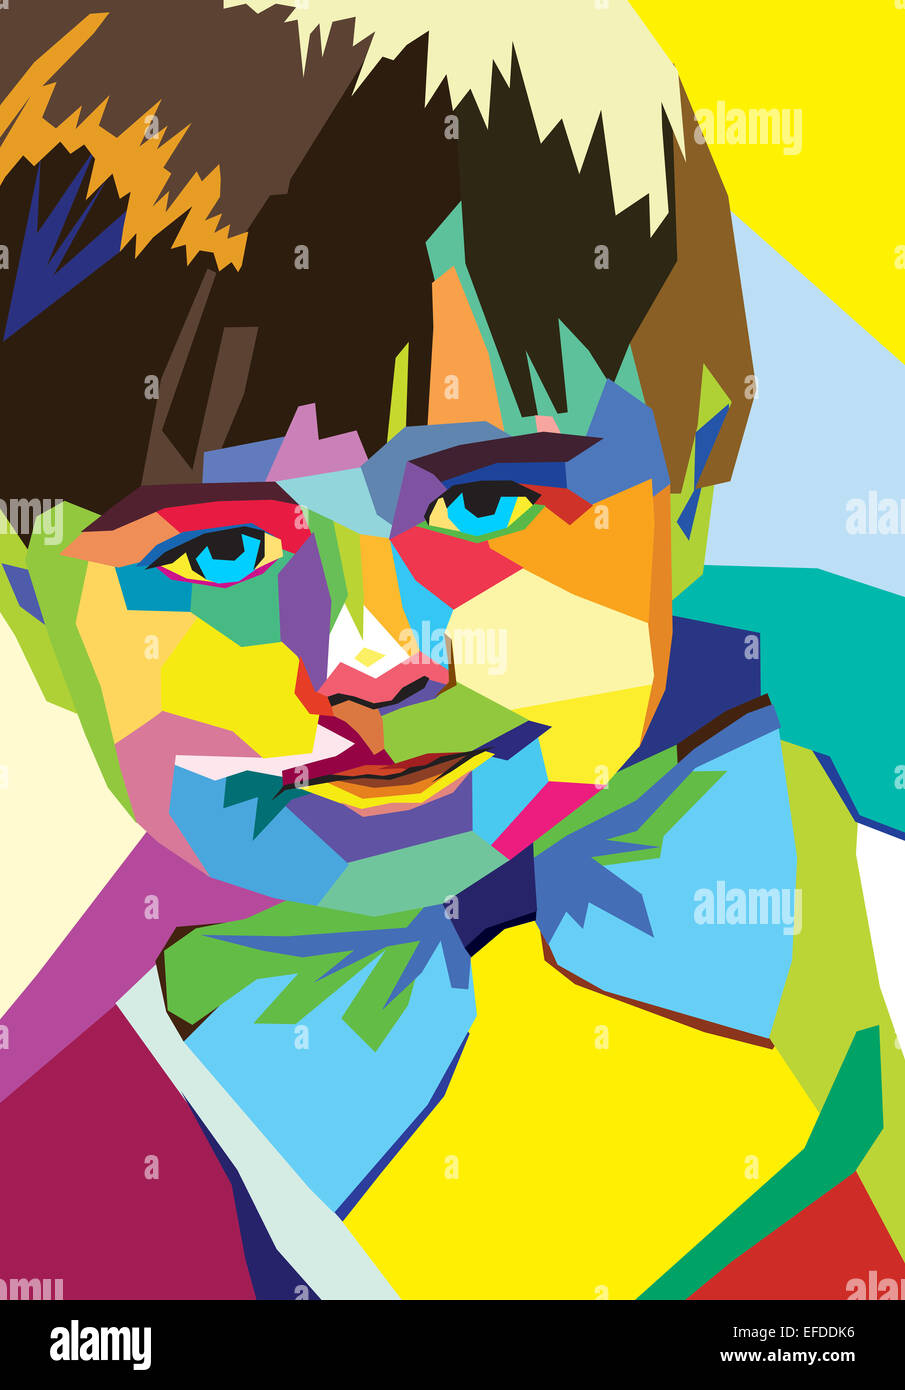 Abstract vector image, colorful boy picture, art Stock Photo